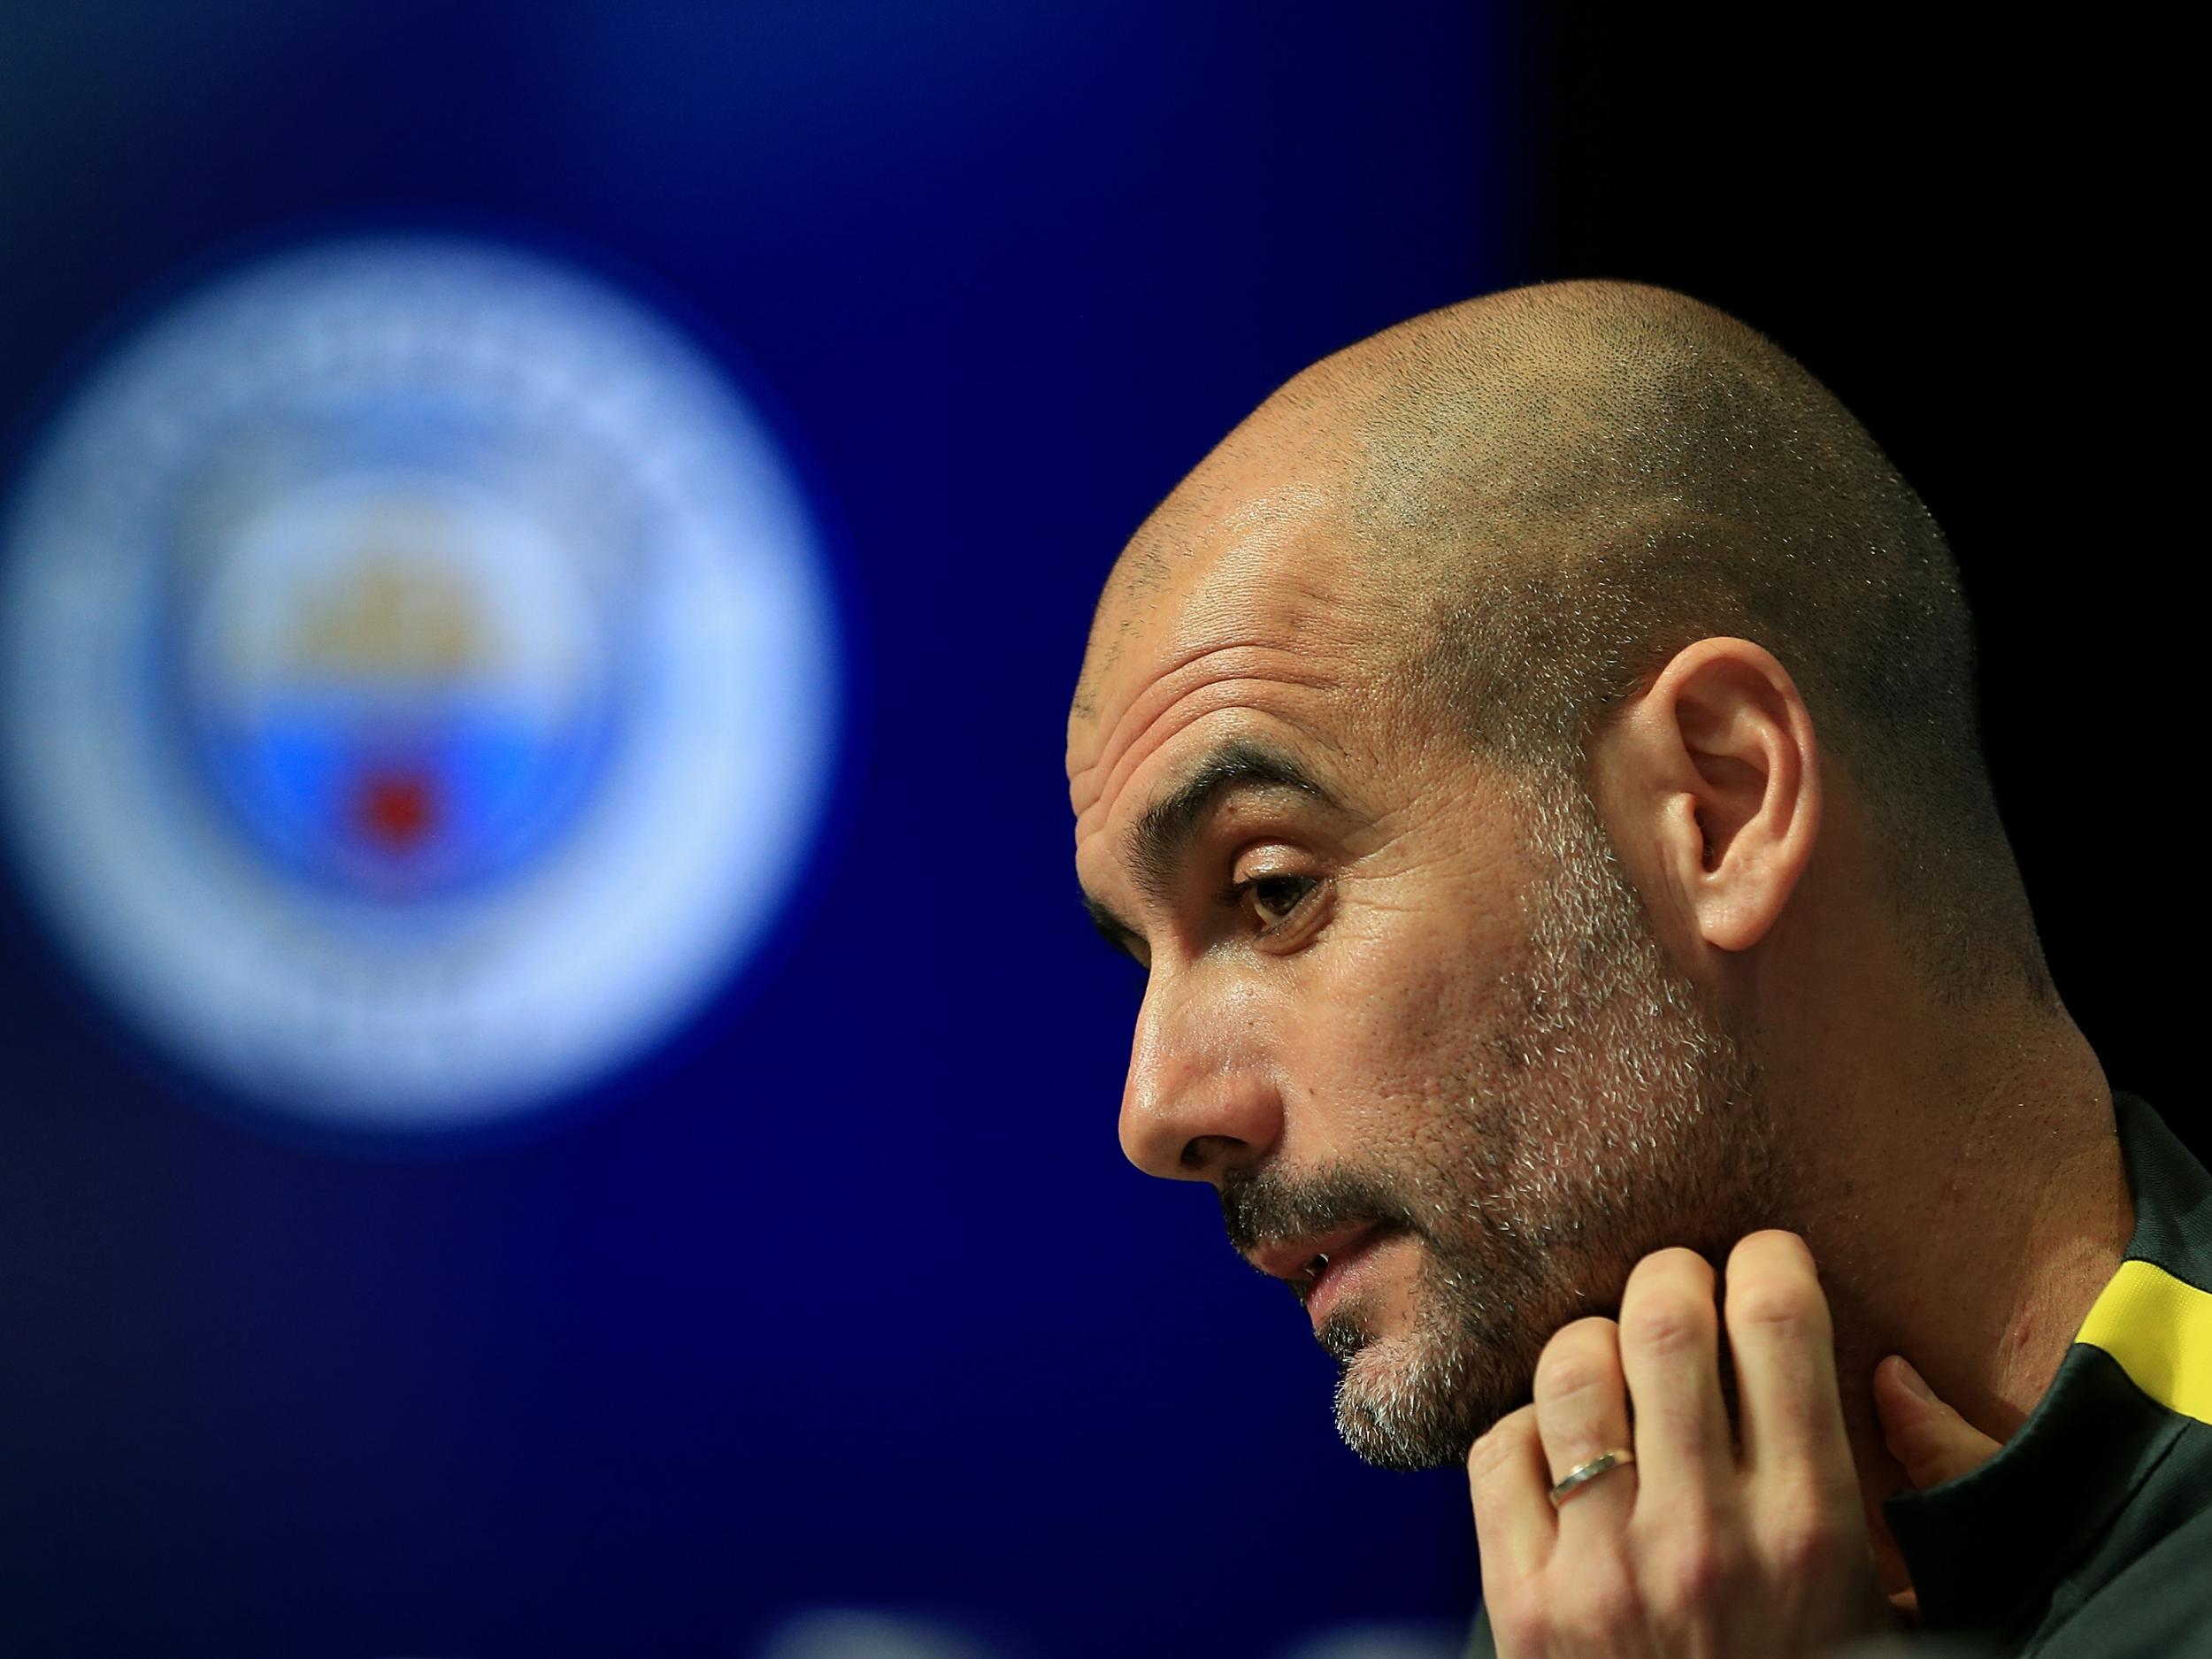 Guardiola stressed the need to qualify for the Champions League